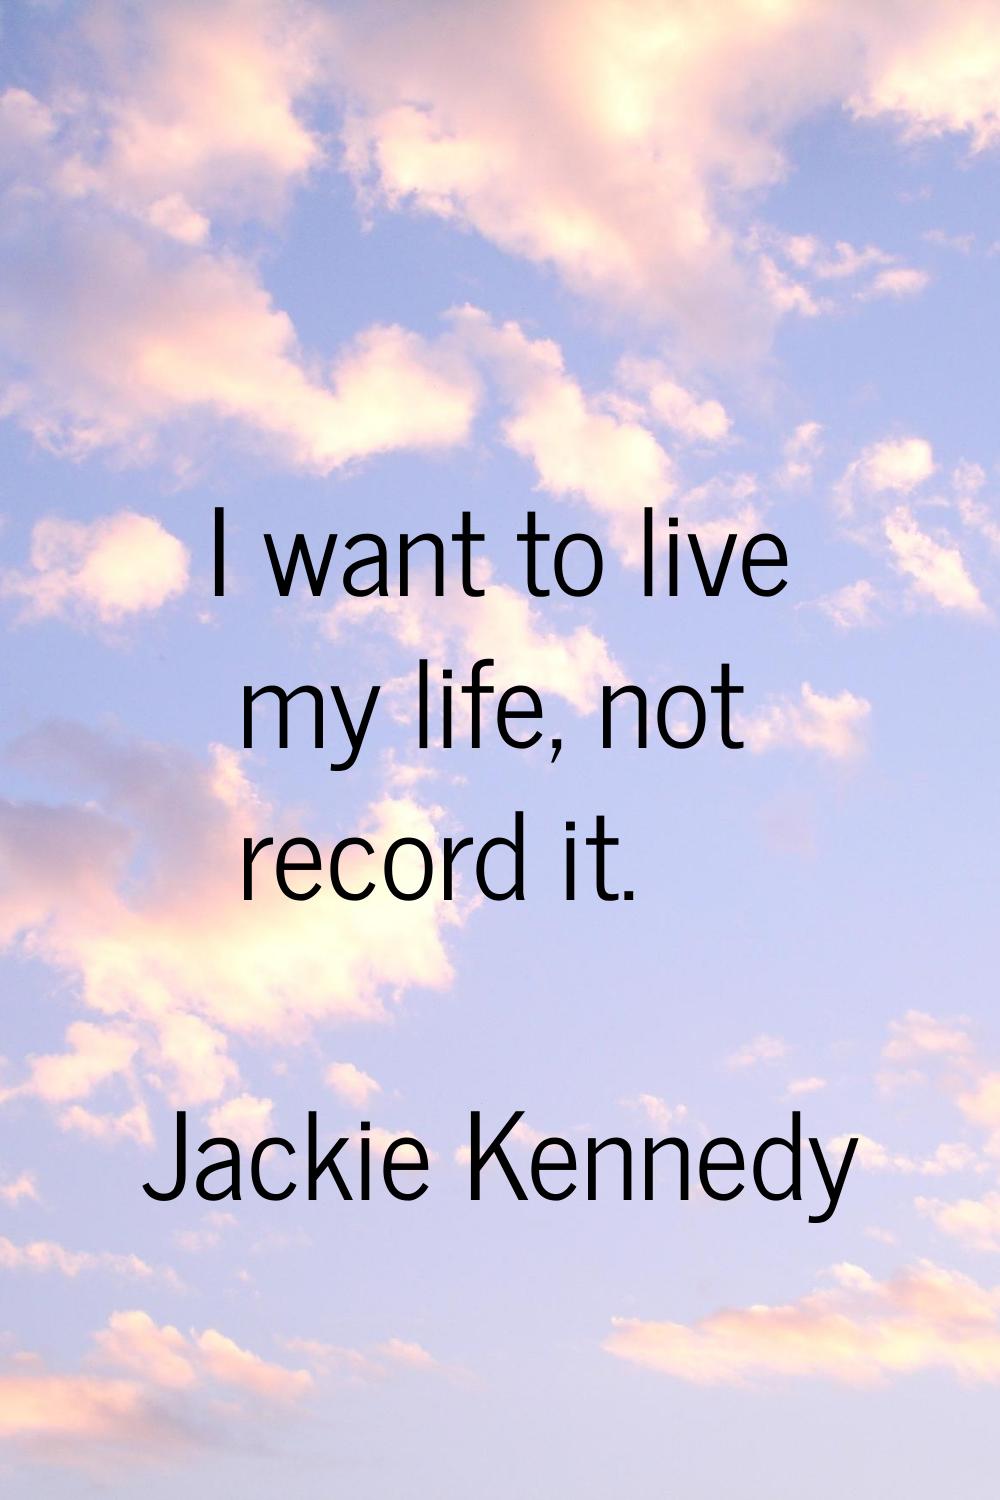 I want to live my life, not record it.